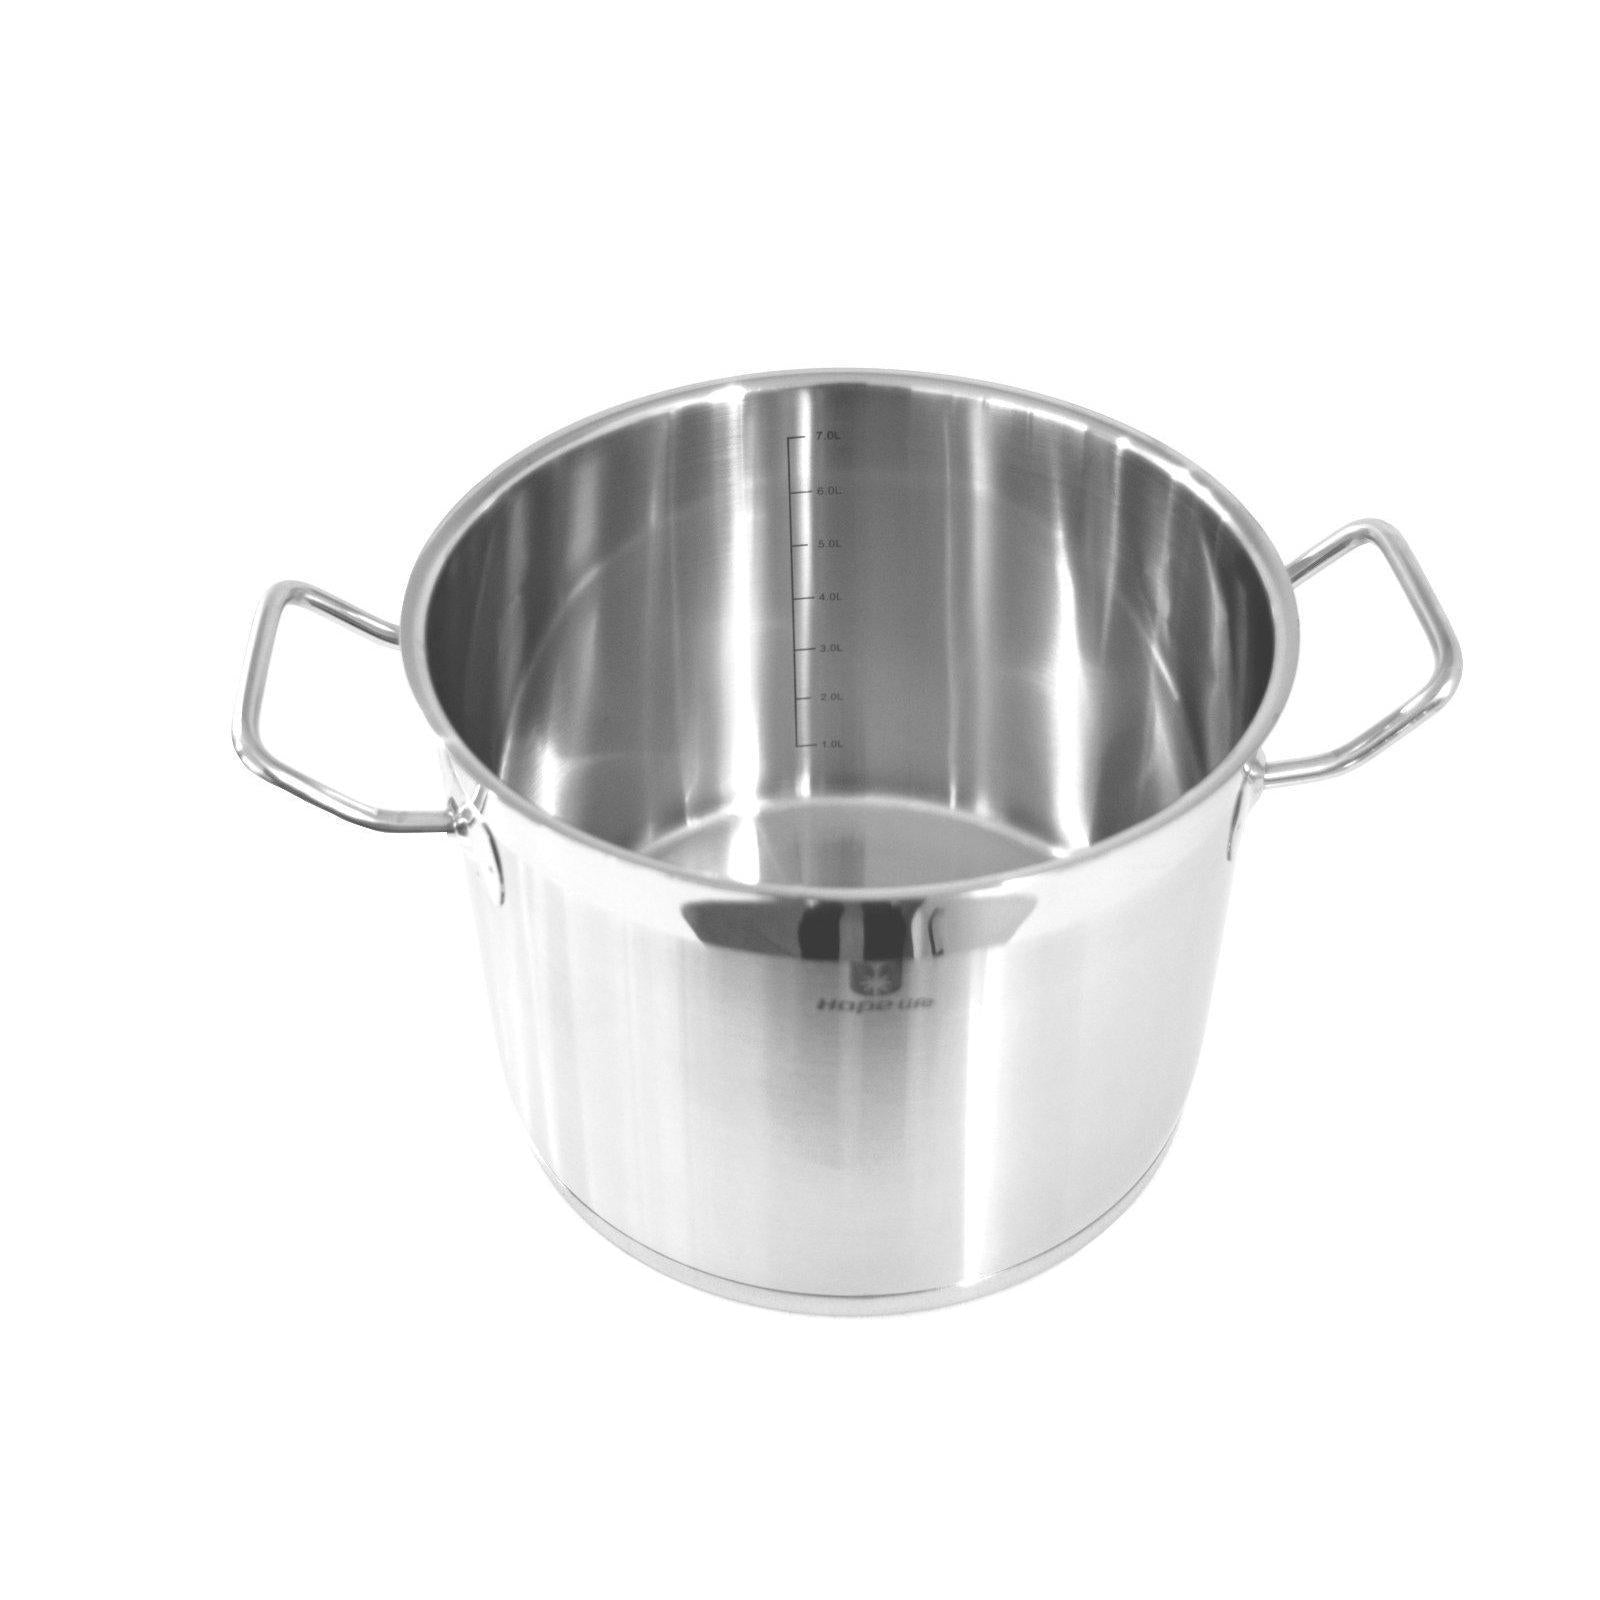 7 Litre Stock Pot - 24 Cm Stainless Steel Induction Compatible-Stainless Steel Cookware-Chef's Quality Cookware